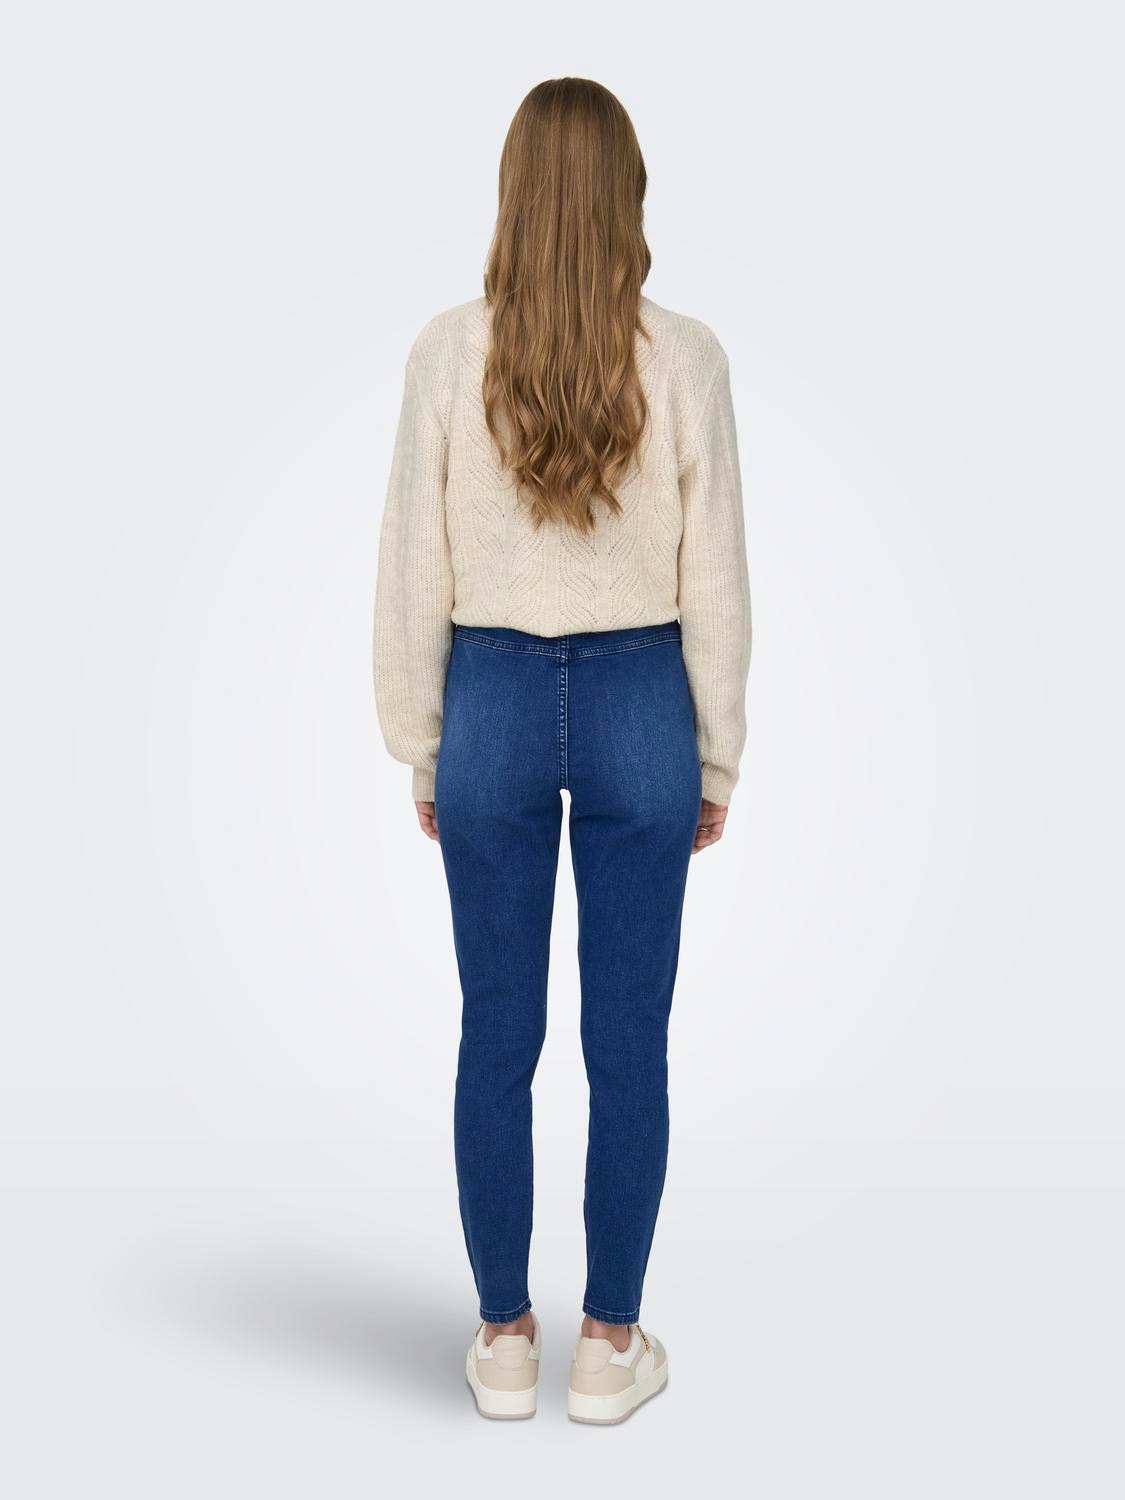 ONLY Slim Fit Hohe Taille Jeggings -Medium Blue Denim - 15323718